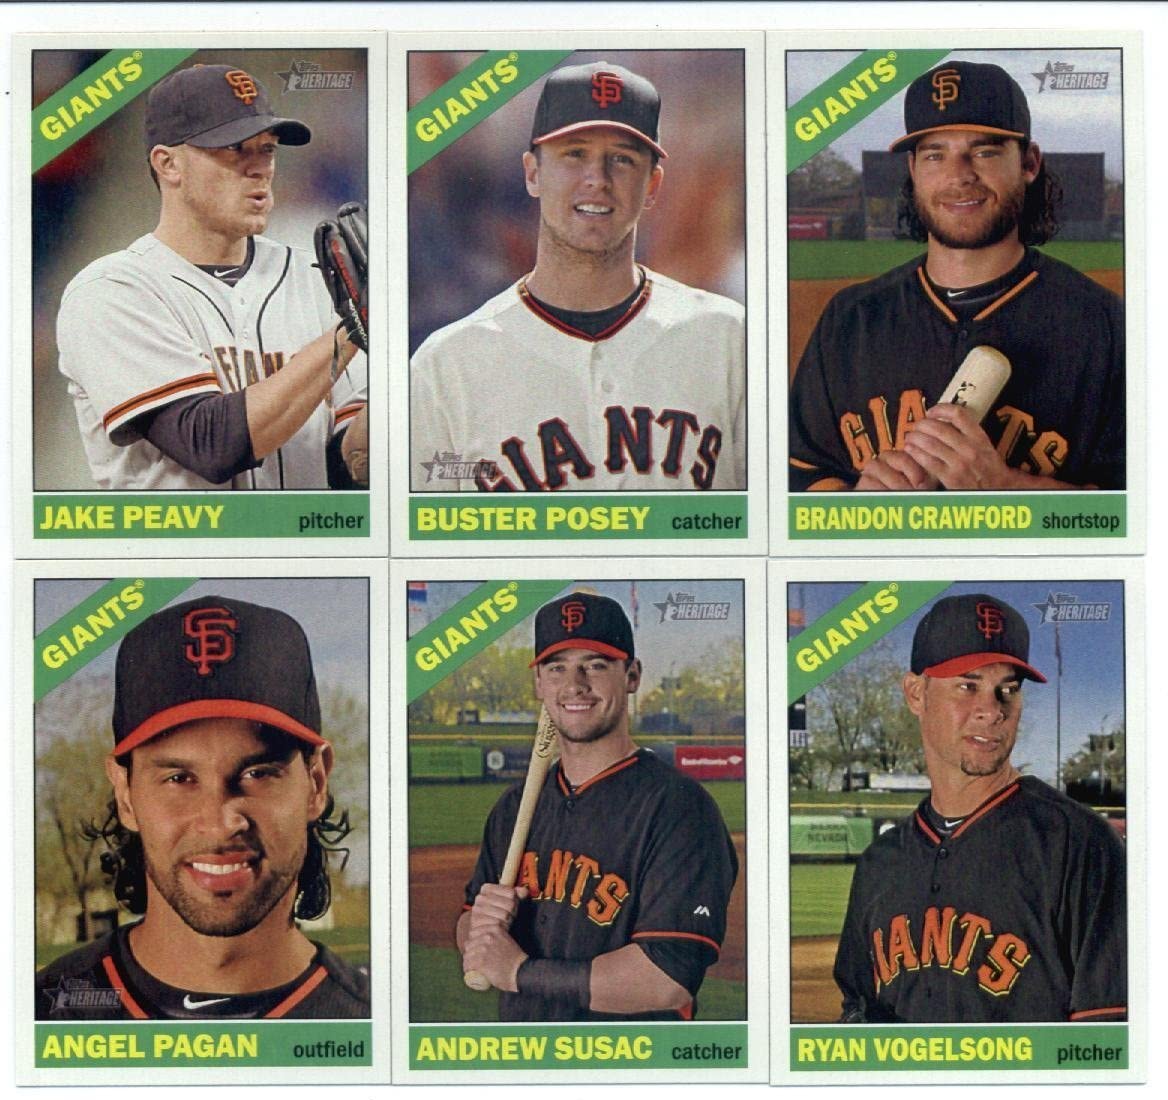  2010 Topps Opening Day #209 Madison Bumgarner San Francisco  Giants MLB Baseball Card (RC - Rookie Card) NM-MT : Collectibles & Fine Art